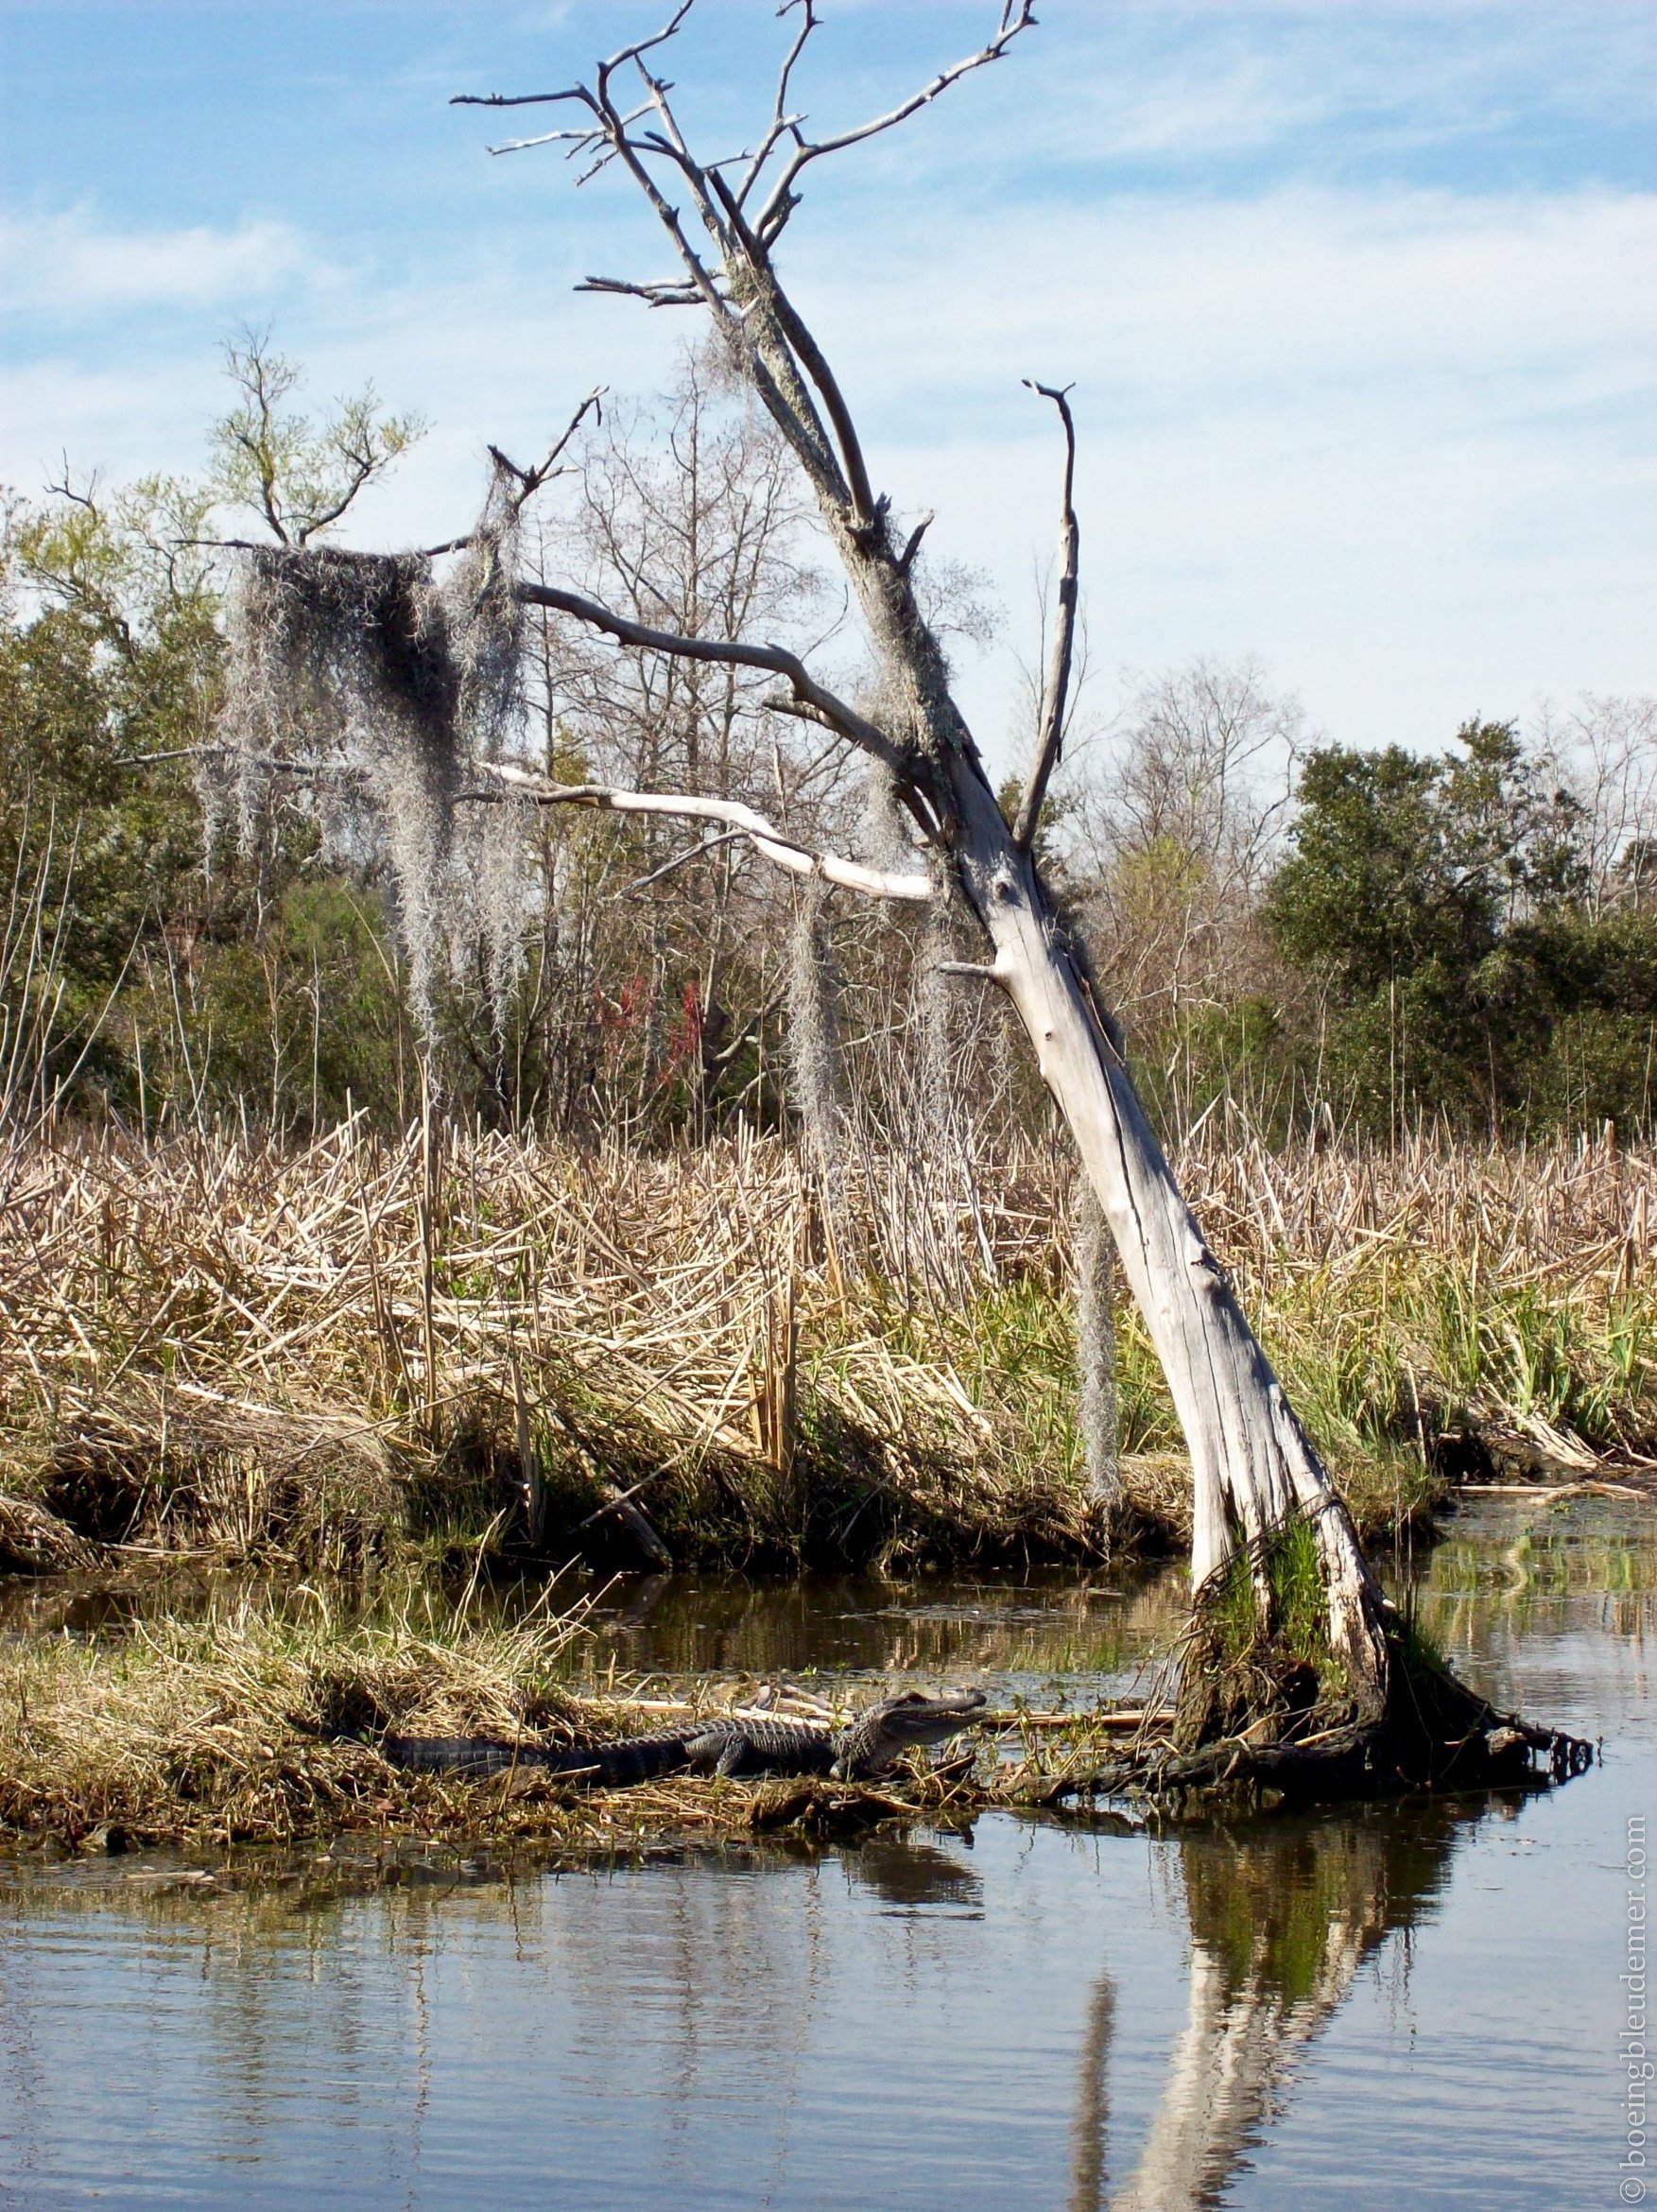 An airboat ride in Louisianna's swamps